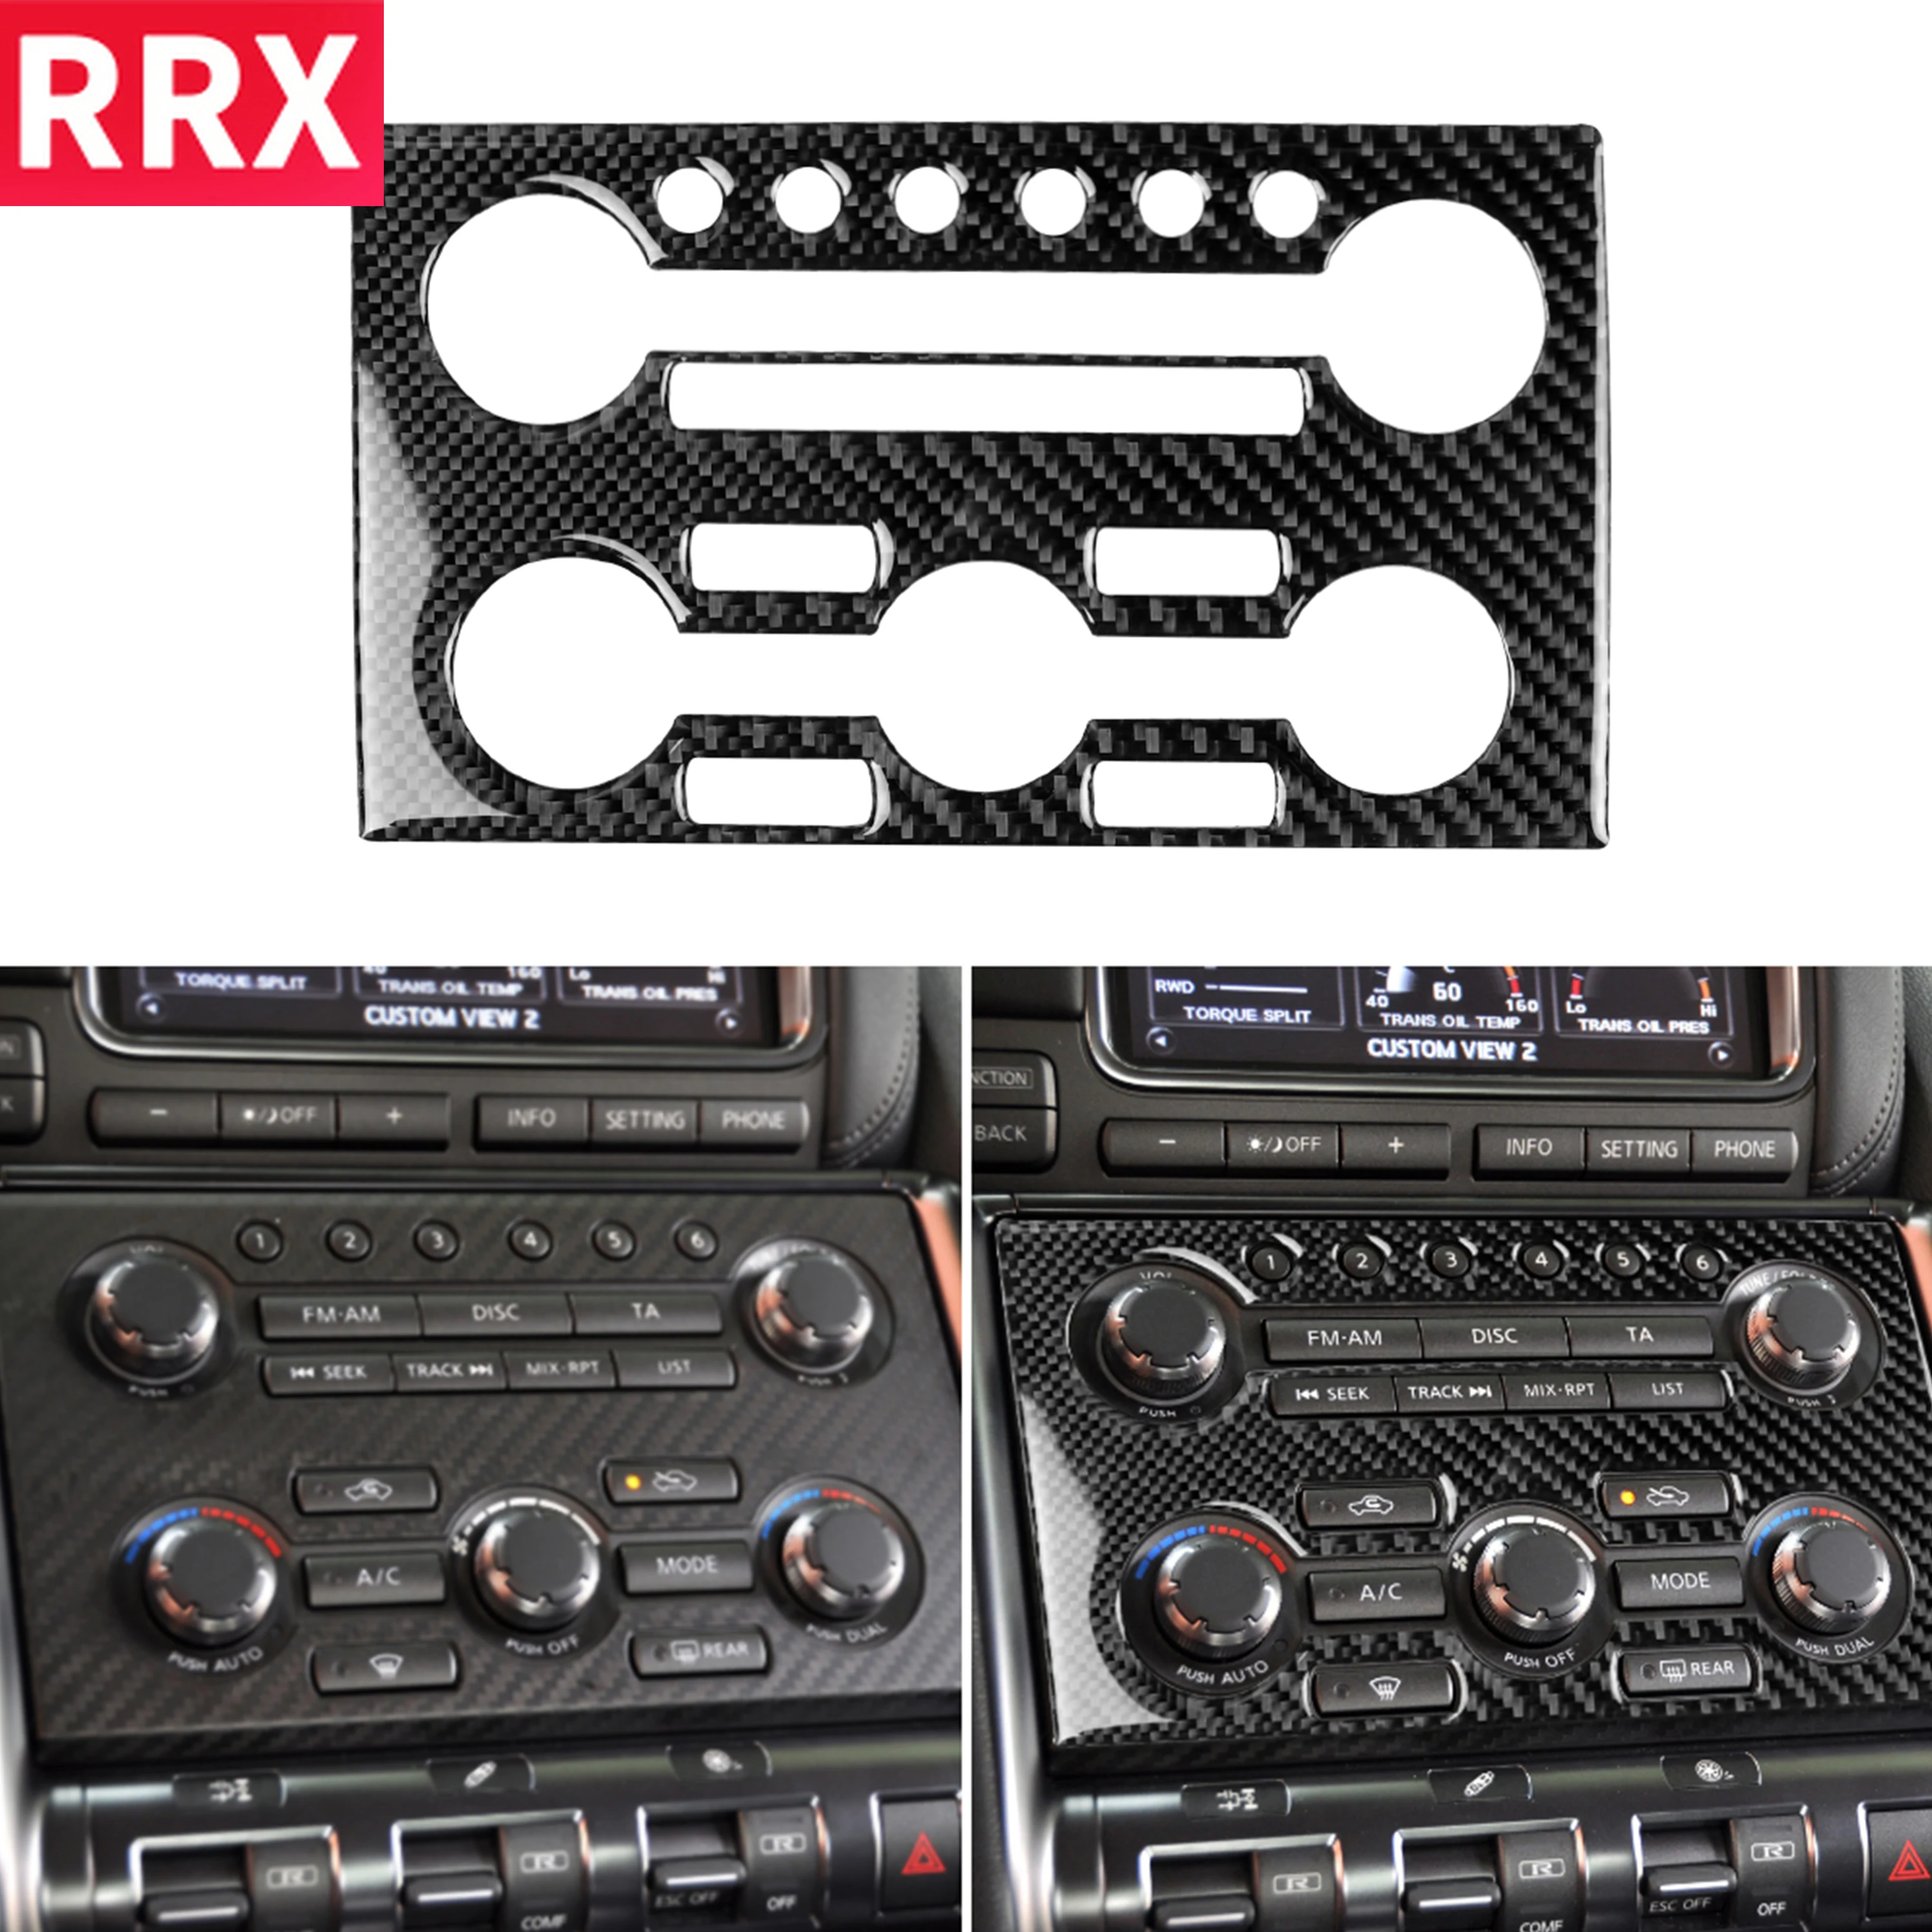 

For Nissan GTR R35 2008-2016 Carbon Radio Climate Control Console Sticker Air Conditioning CD Panel Cover Trim Car Accessories